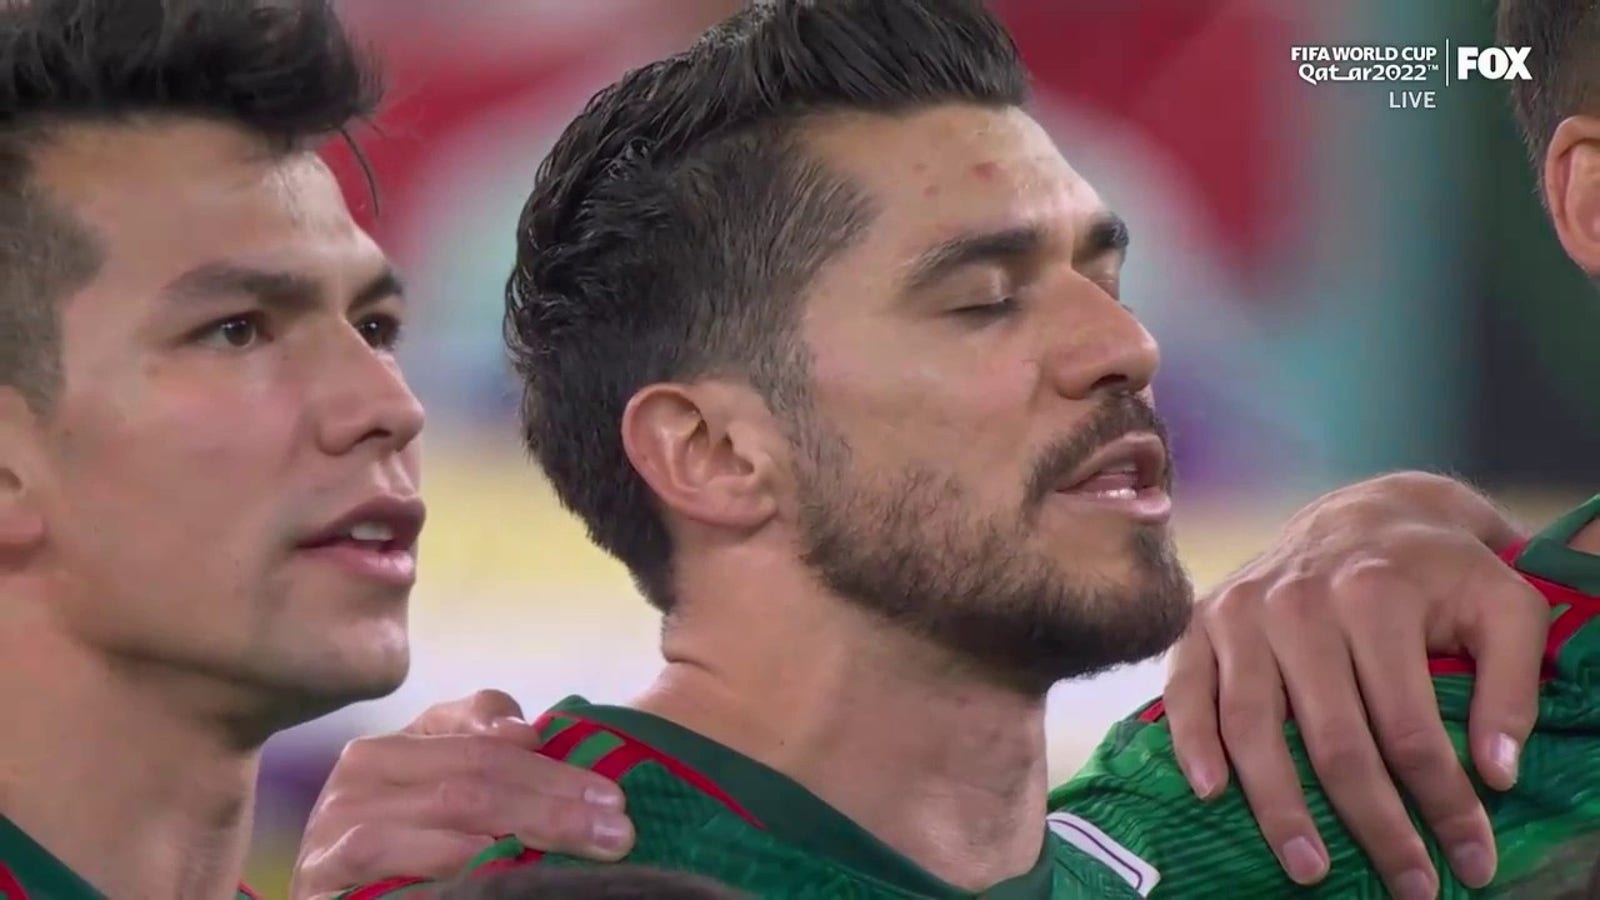 Mexico's national anthem before the opening match